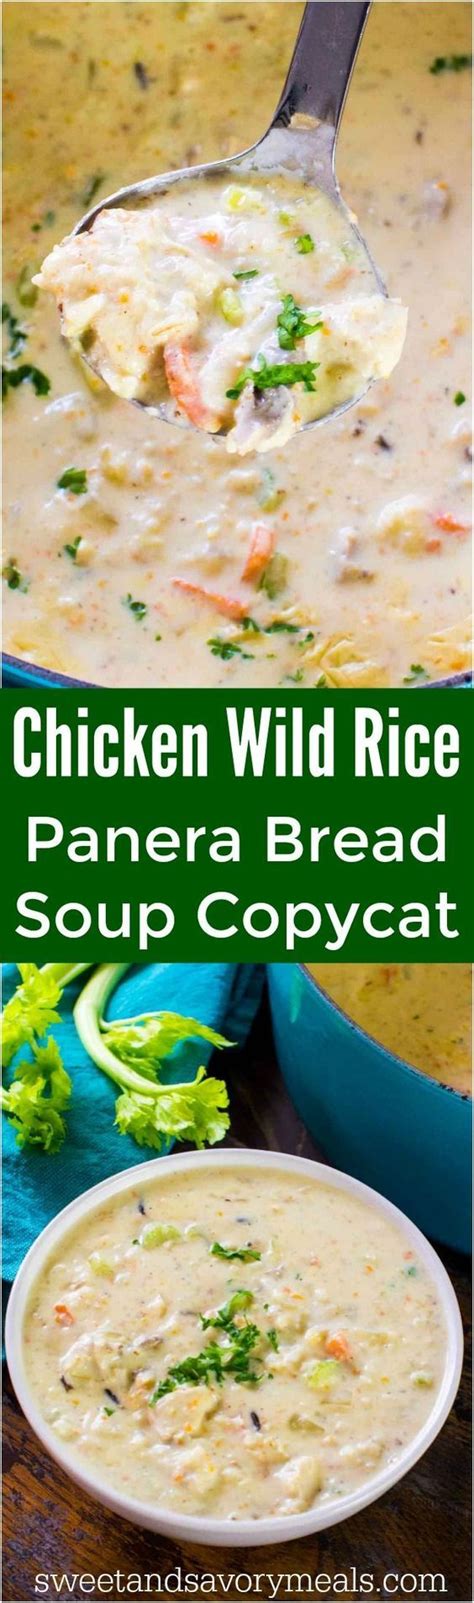 *see notes below for cooking time adjustments*. Panera Bread Chicken Wild Rice Soup Copycat [VIDEO ...